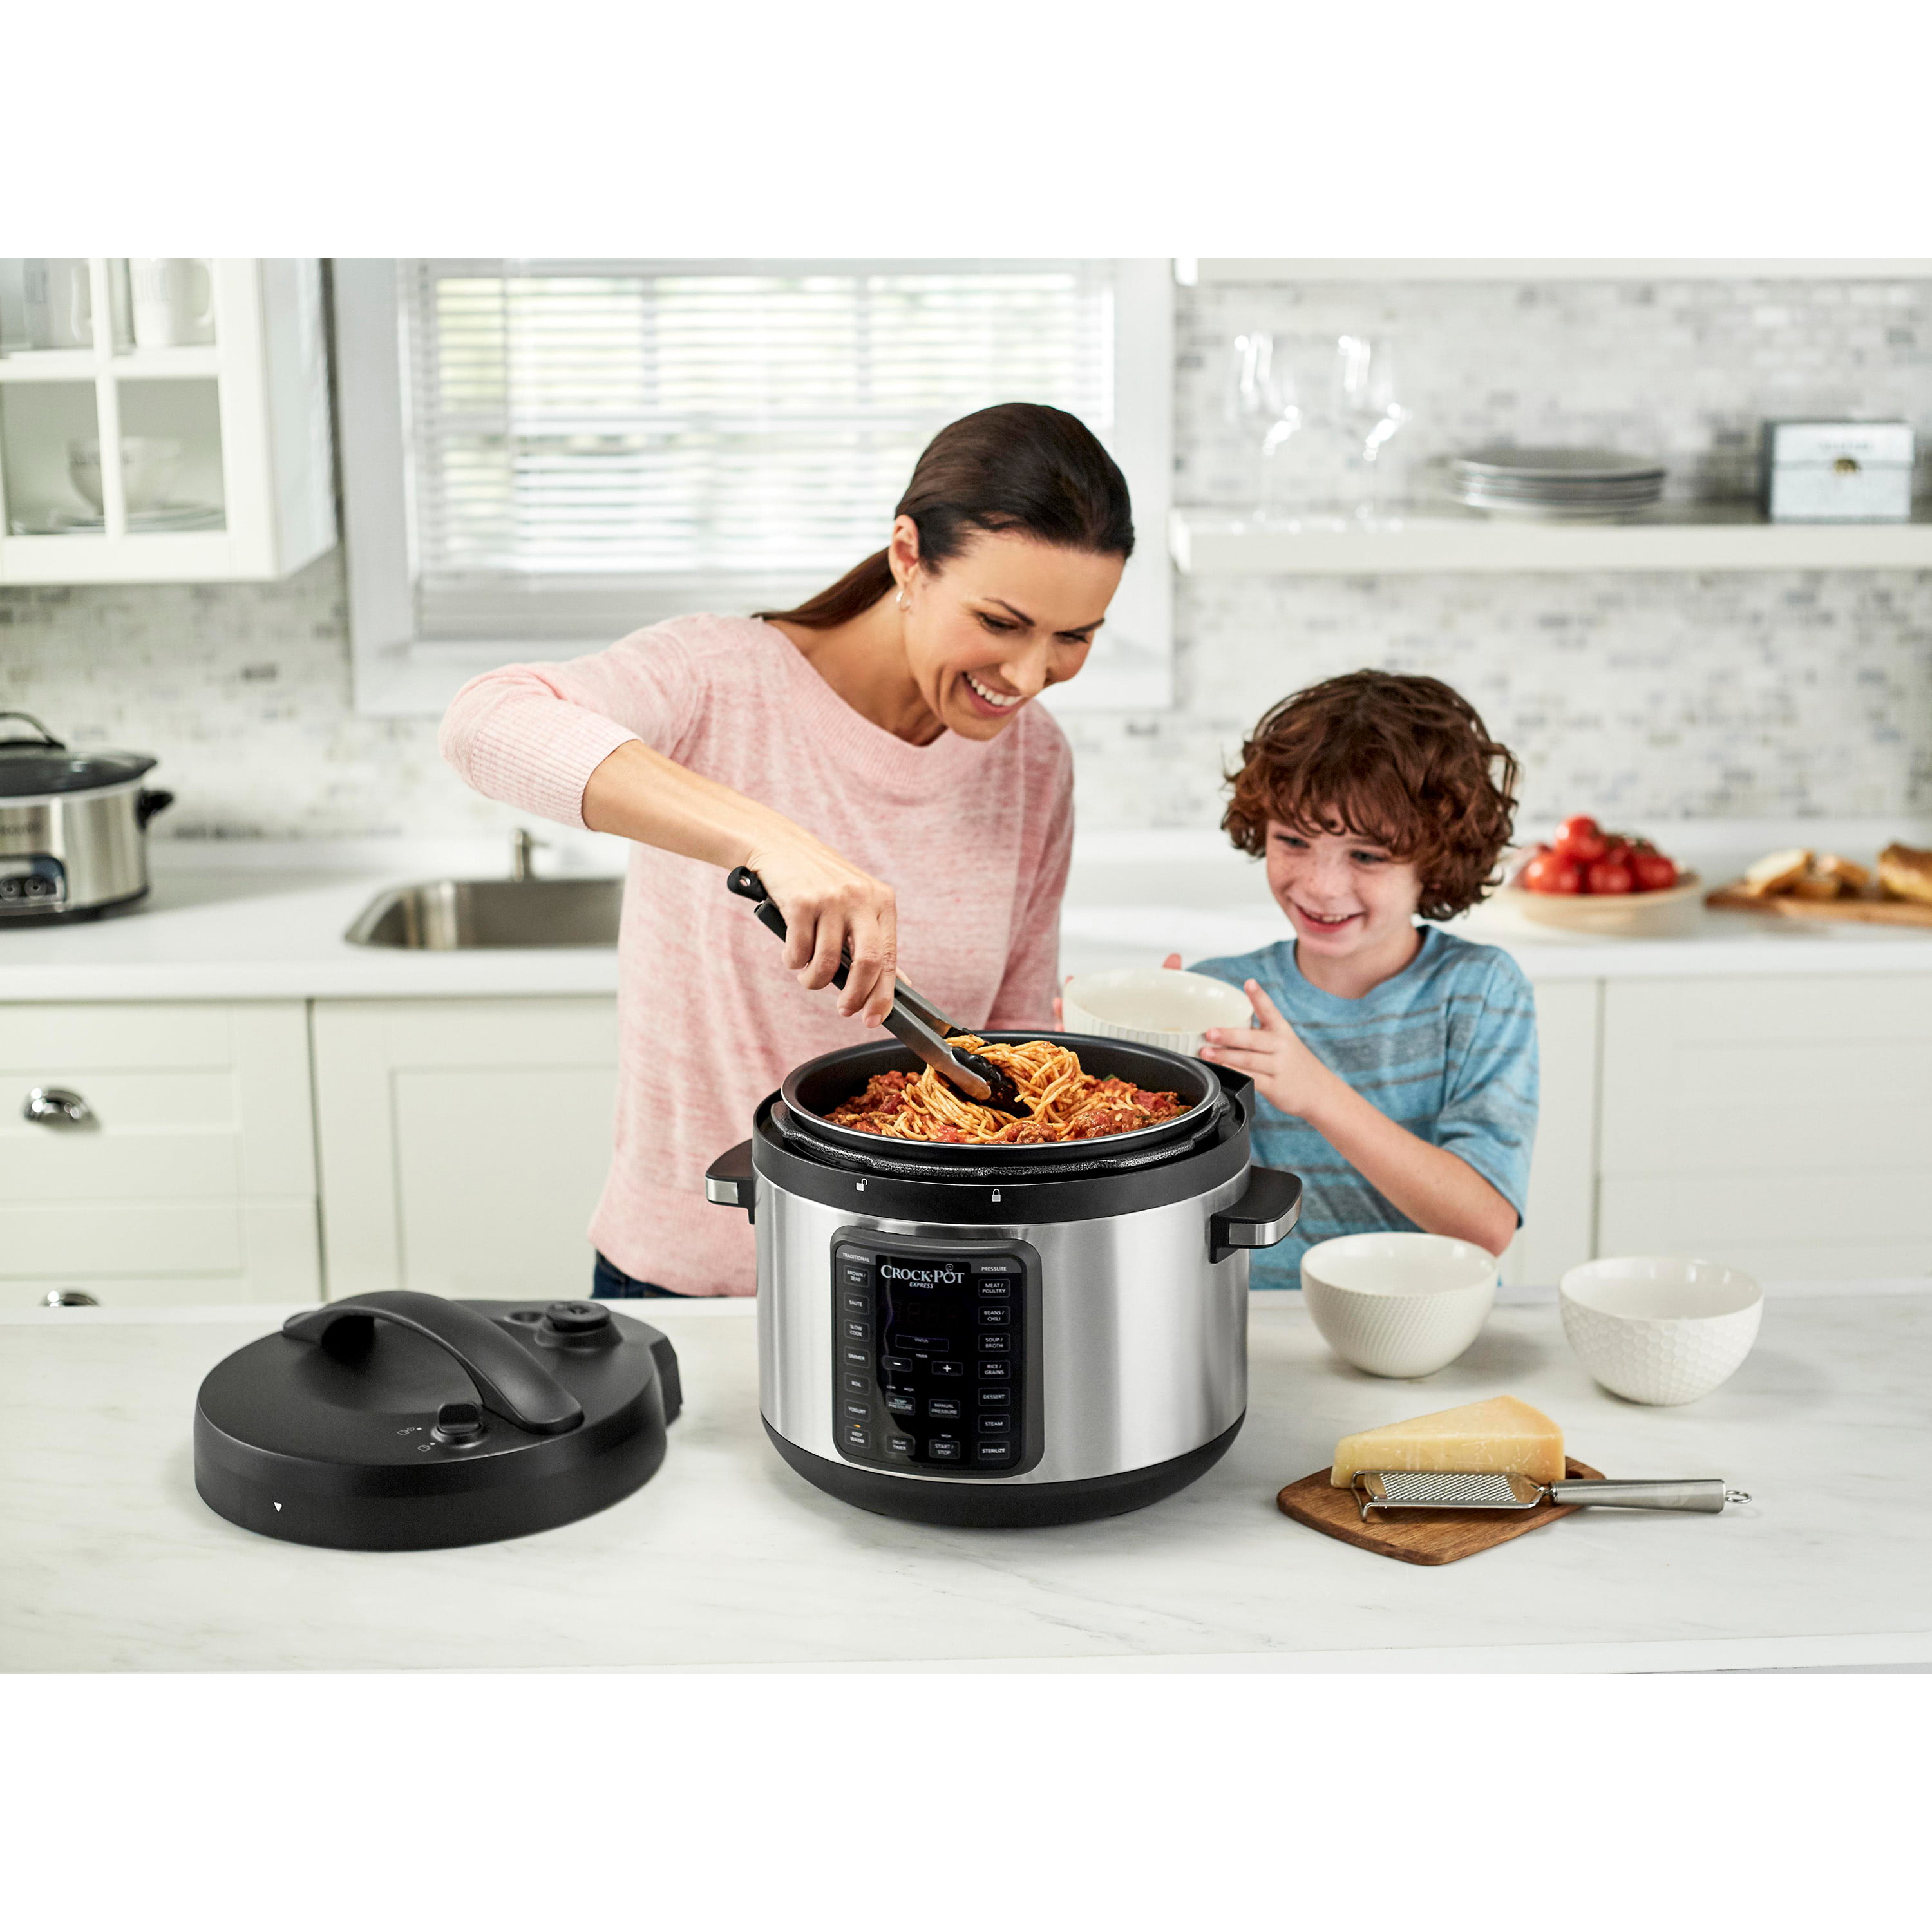 Win 1 of 10 Crockpot Express XL Easy Release Pressure Multicookers valued  at $249 - Competition